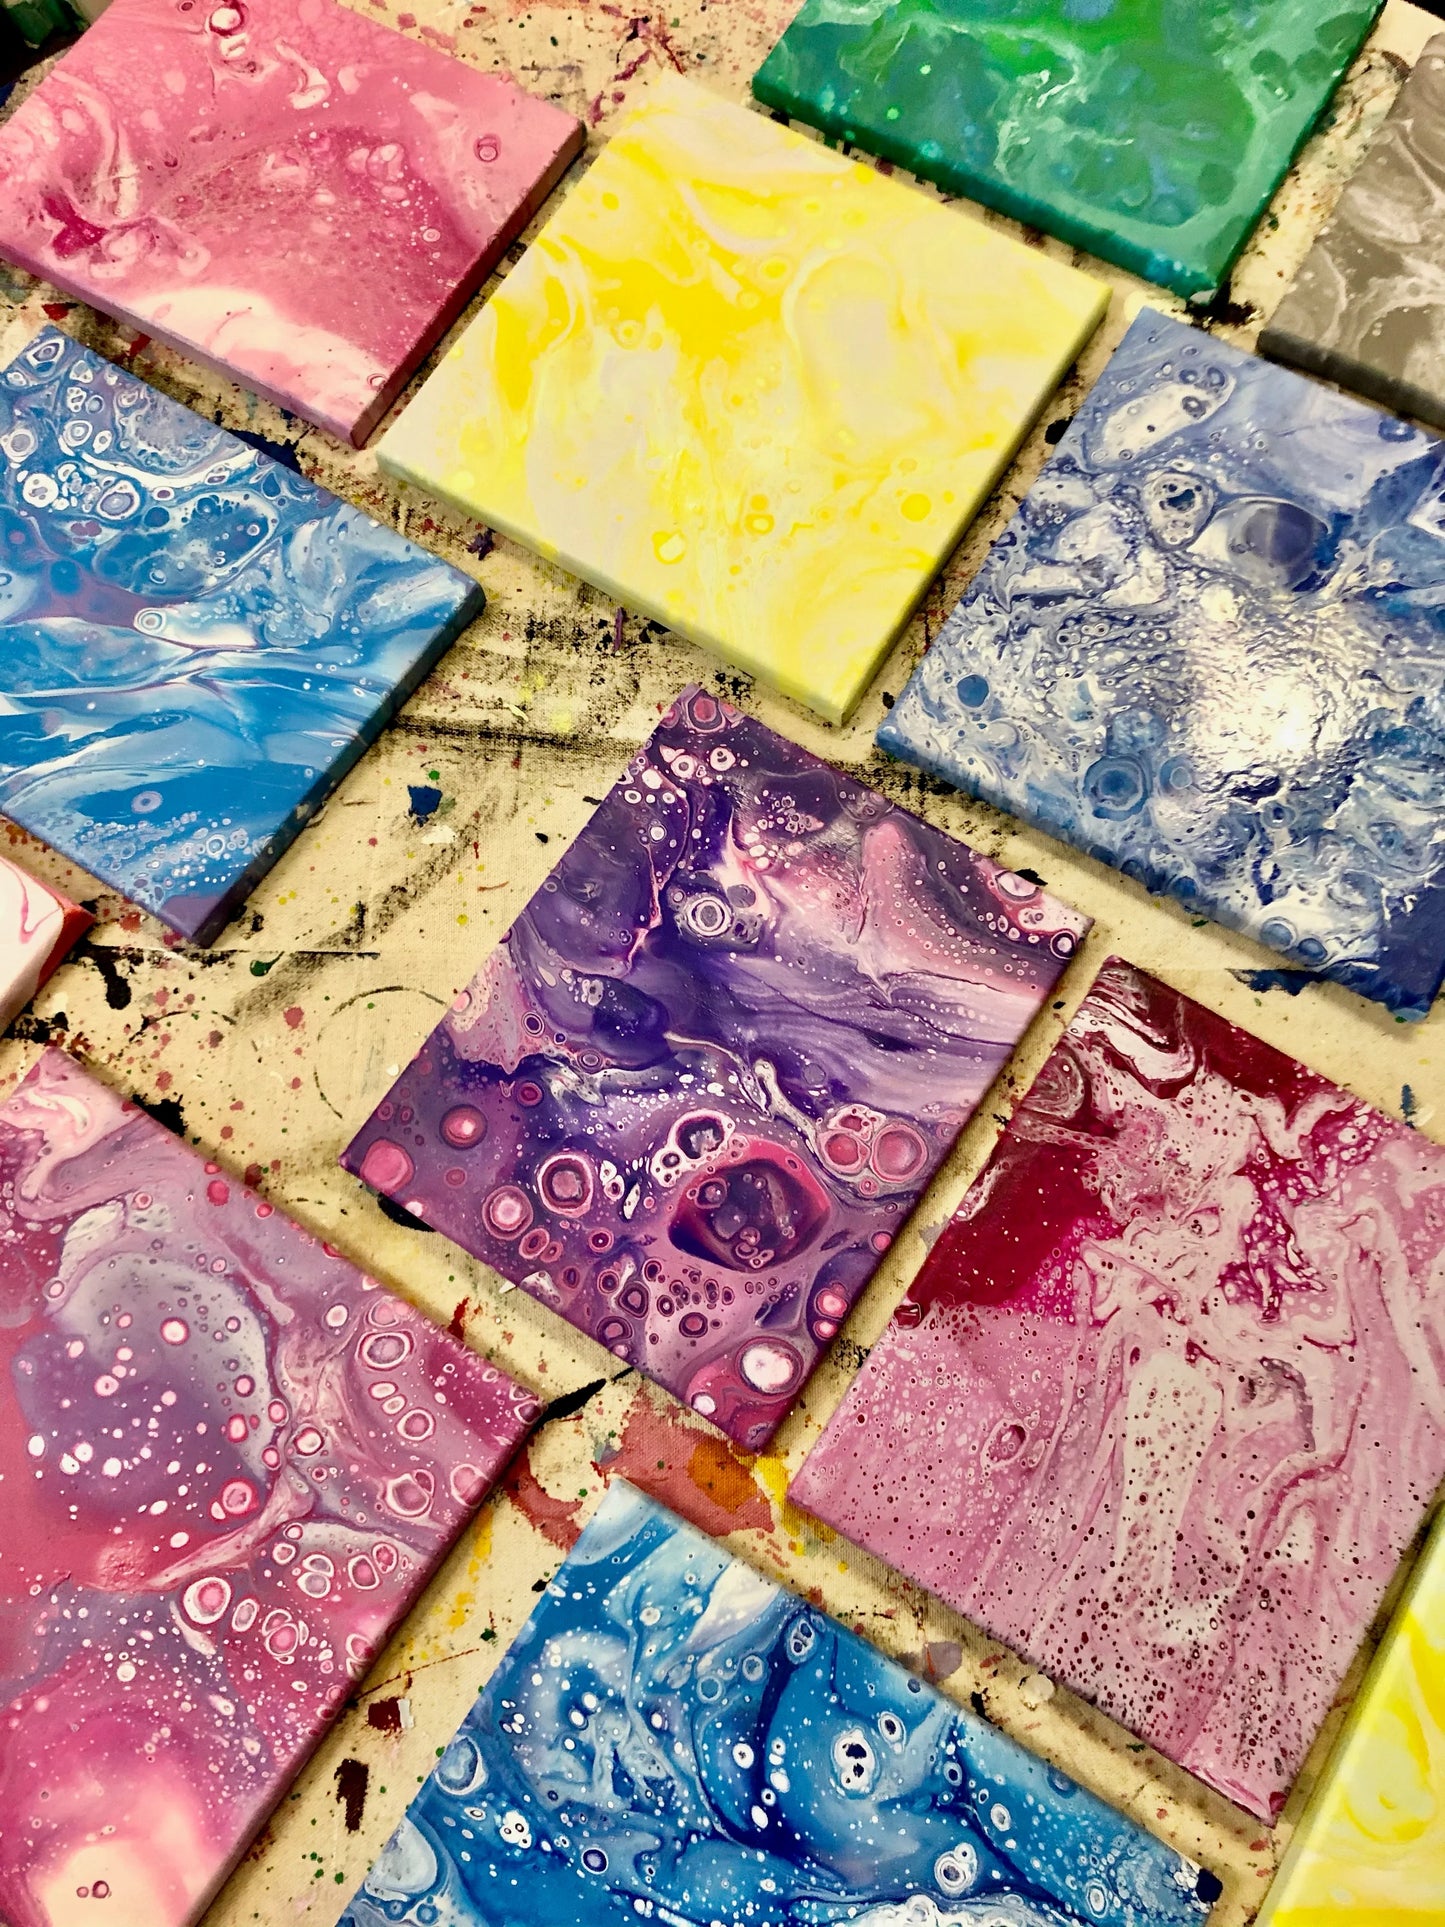 Valentine's Couples Acrylic Pouring!